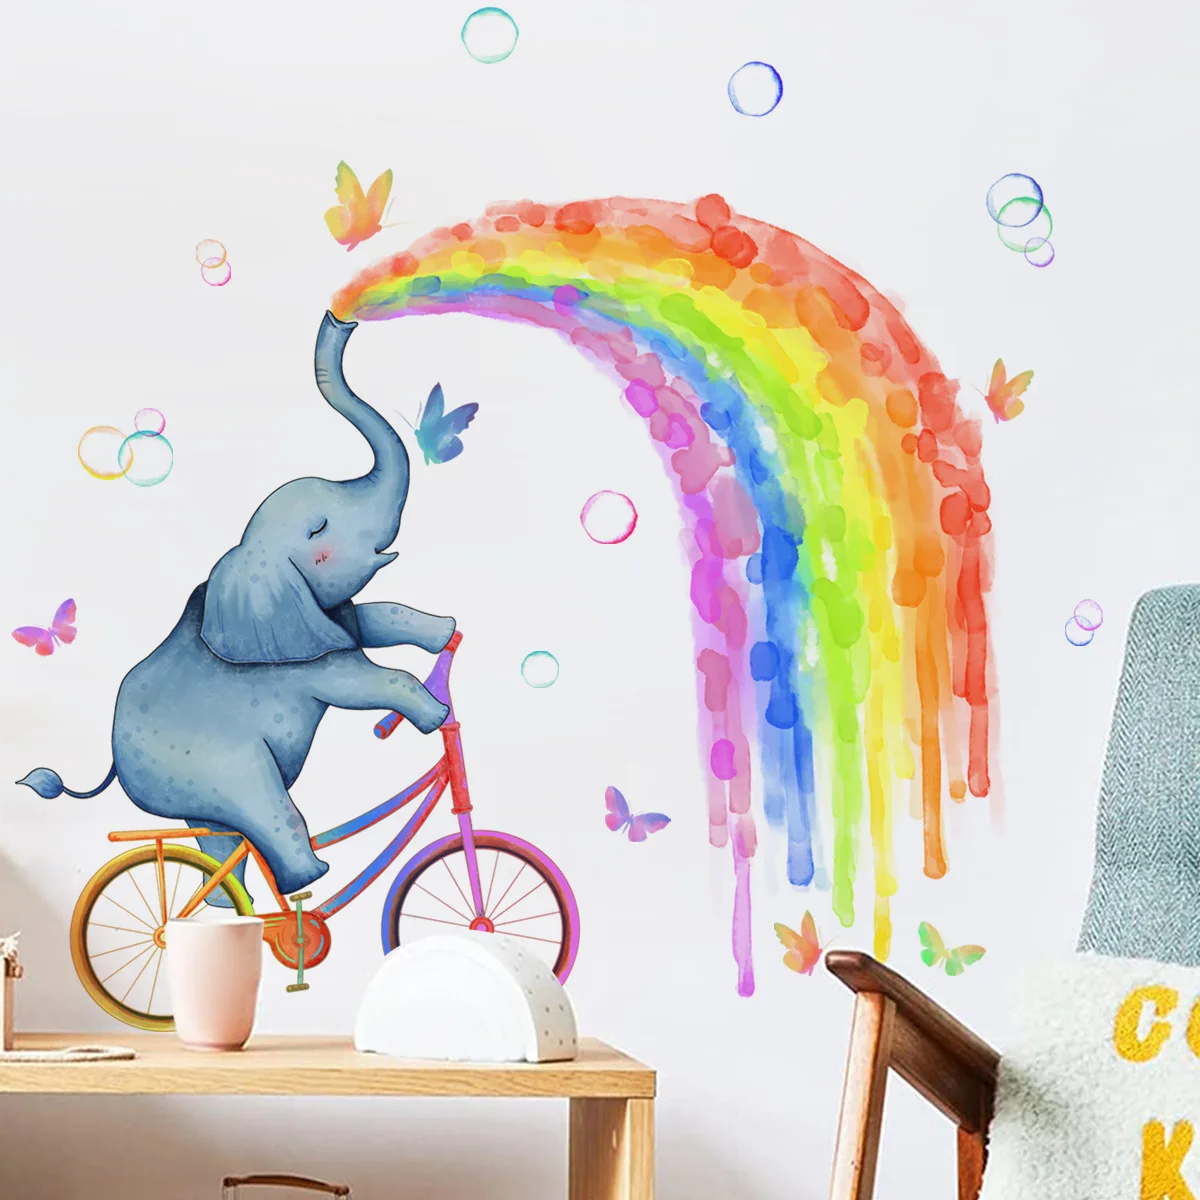 Elephant Rainbow Bubble Butterfly Wall Stickers Self-adhesive PVC Creative Minimalist Home Decor for Living Room Bedroom